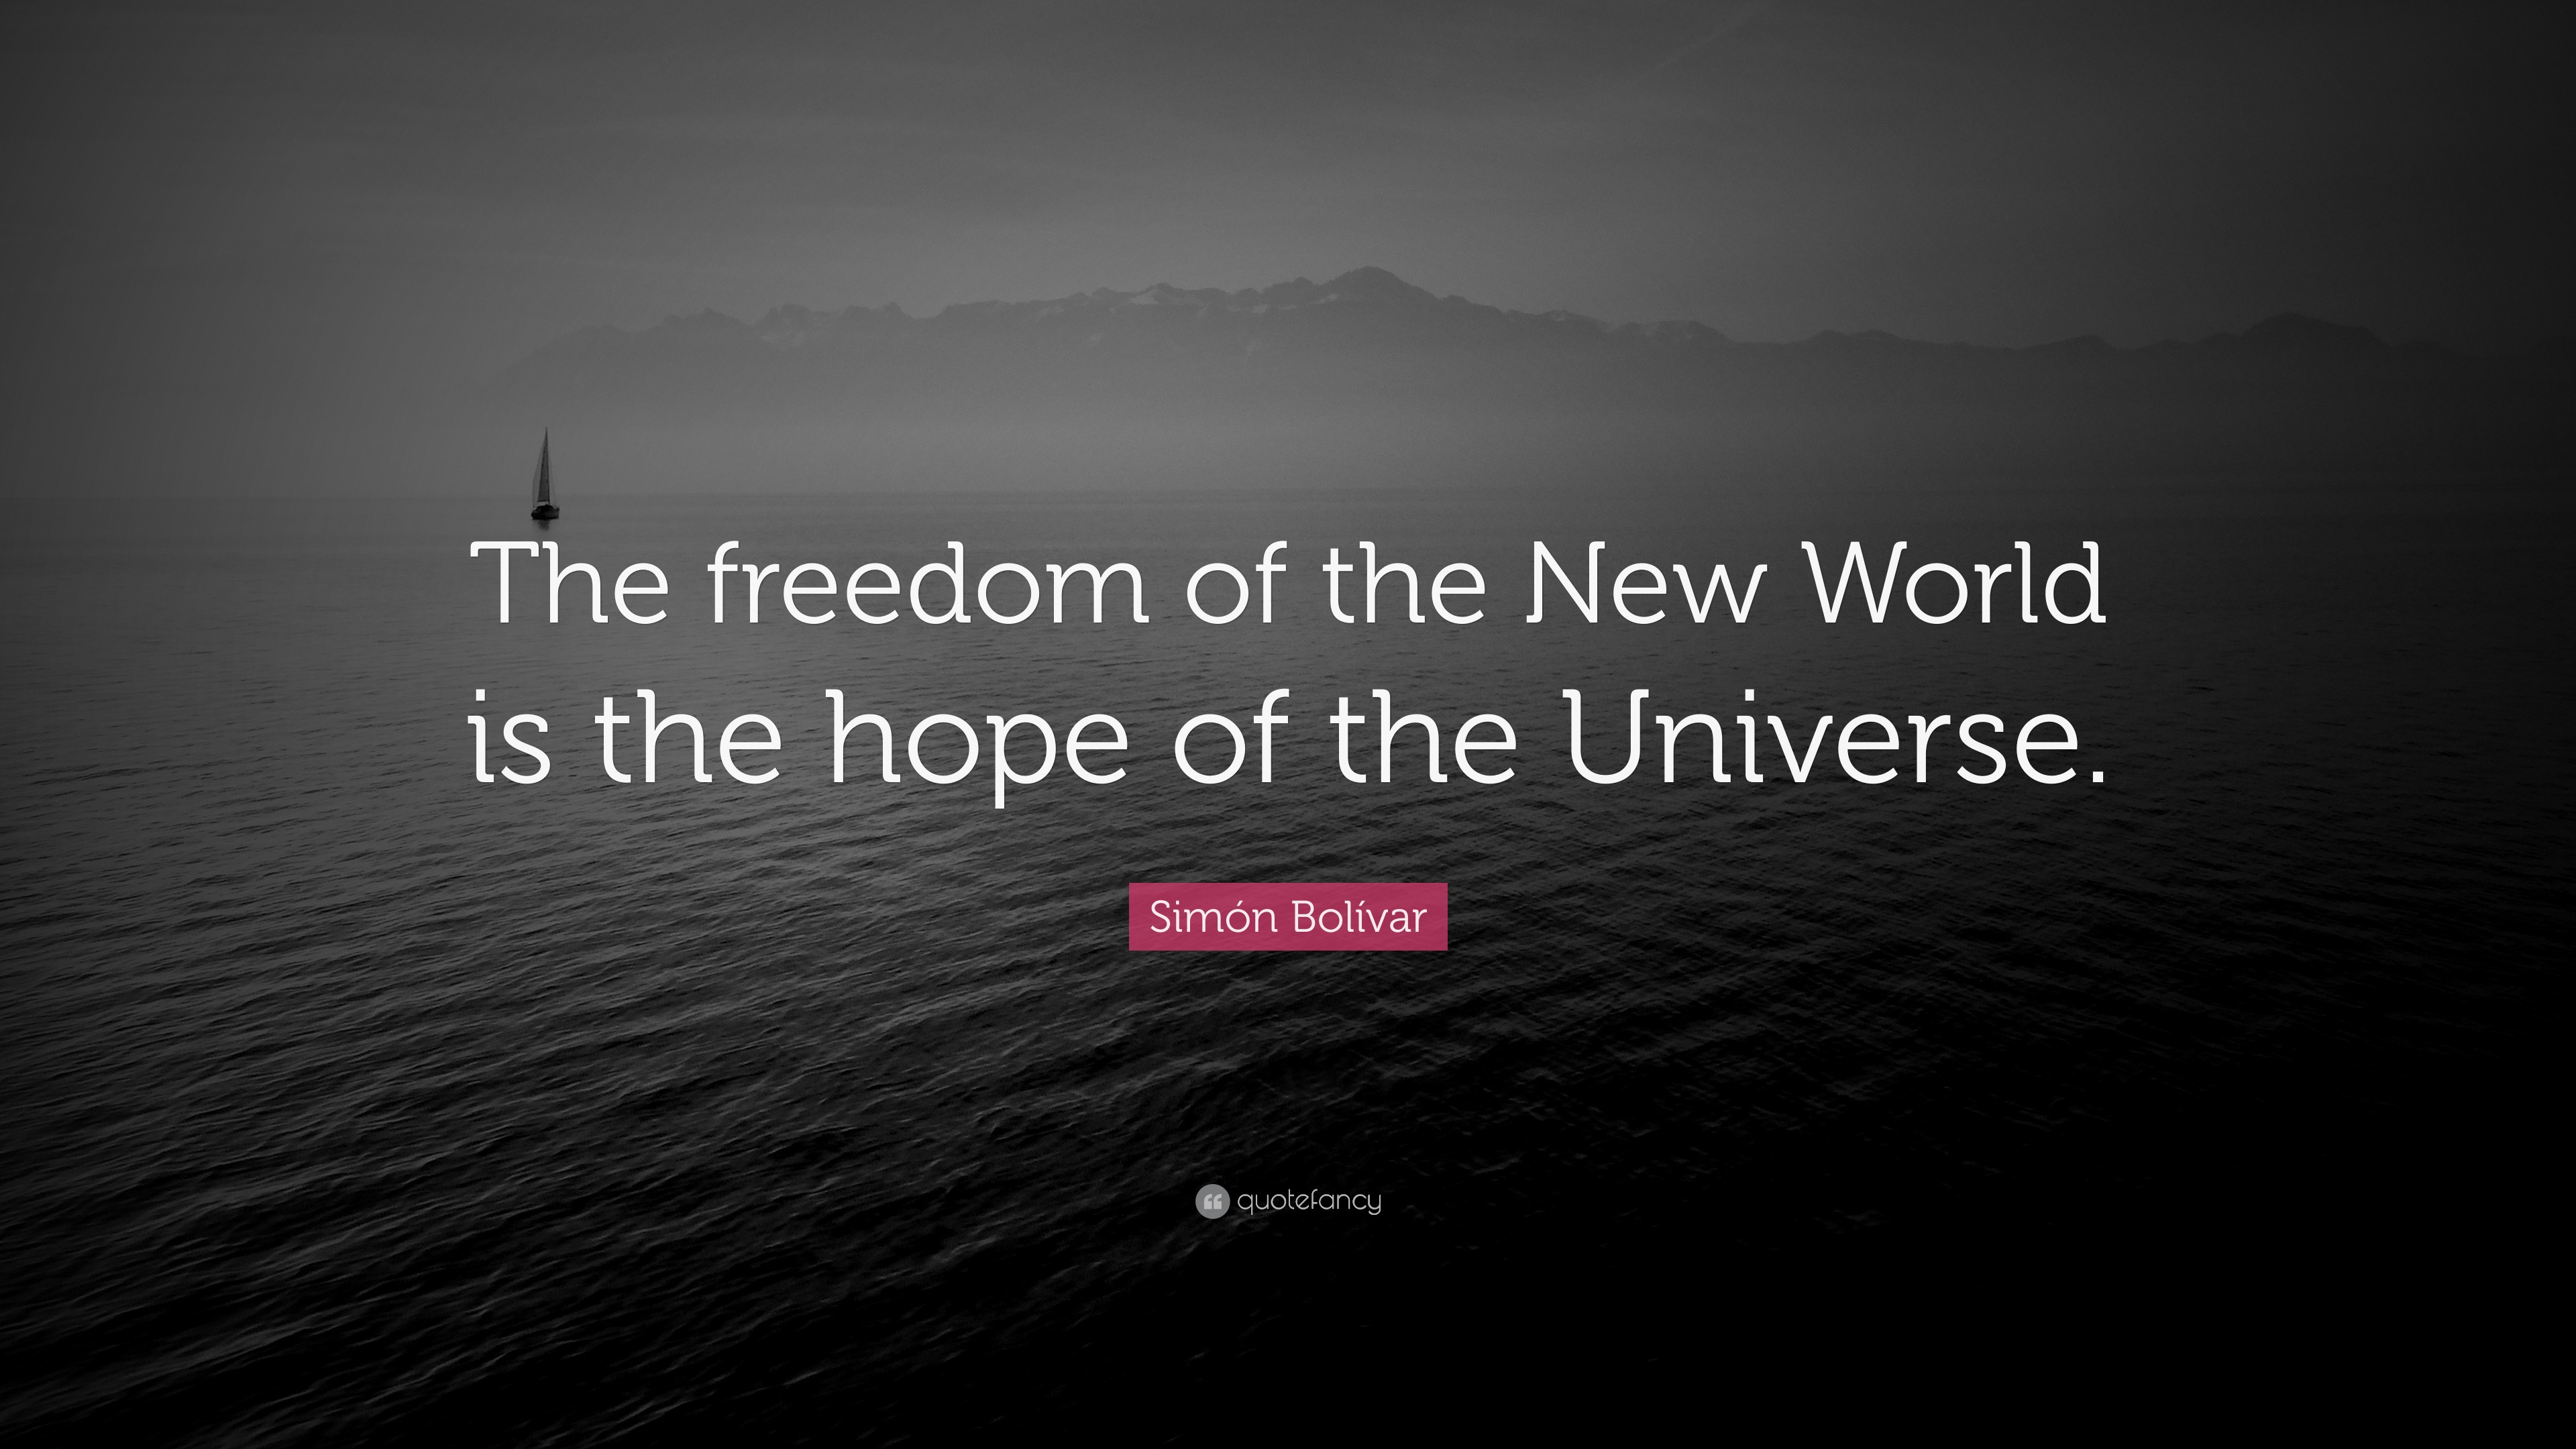 Simón Bolívar Quote: “The freedom of the New World is the hope of the ...